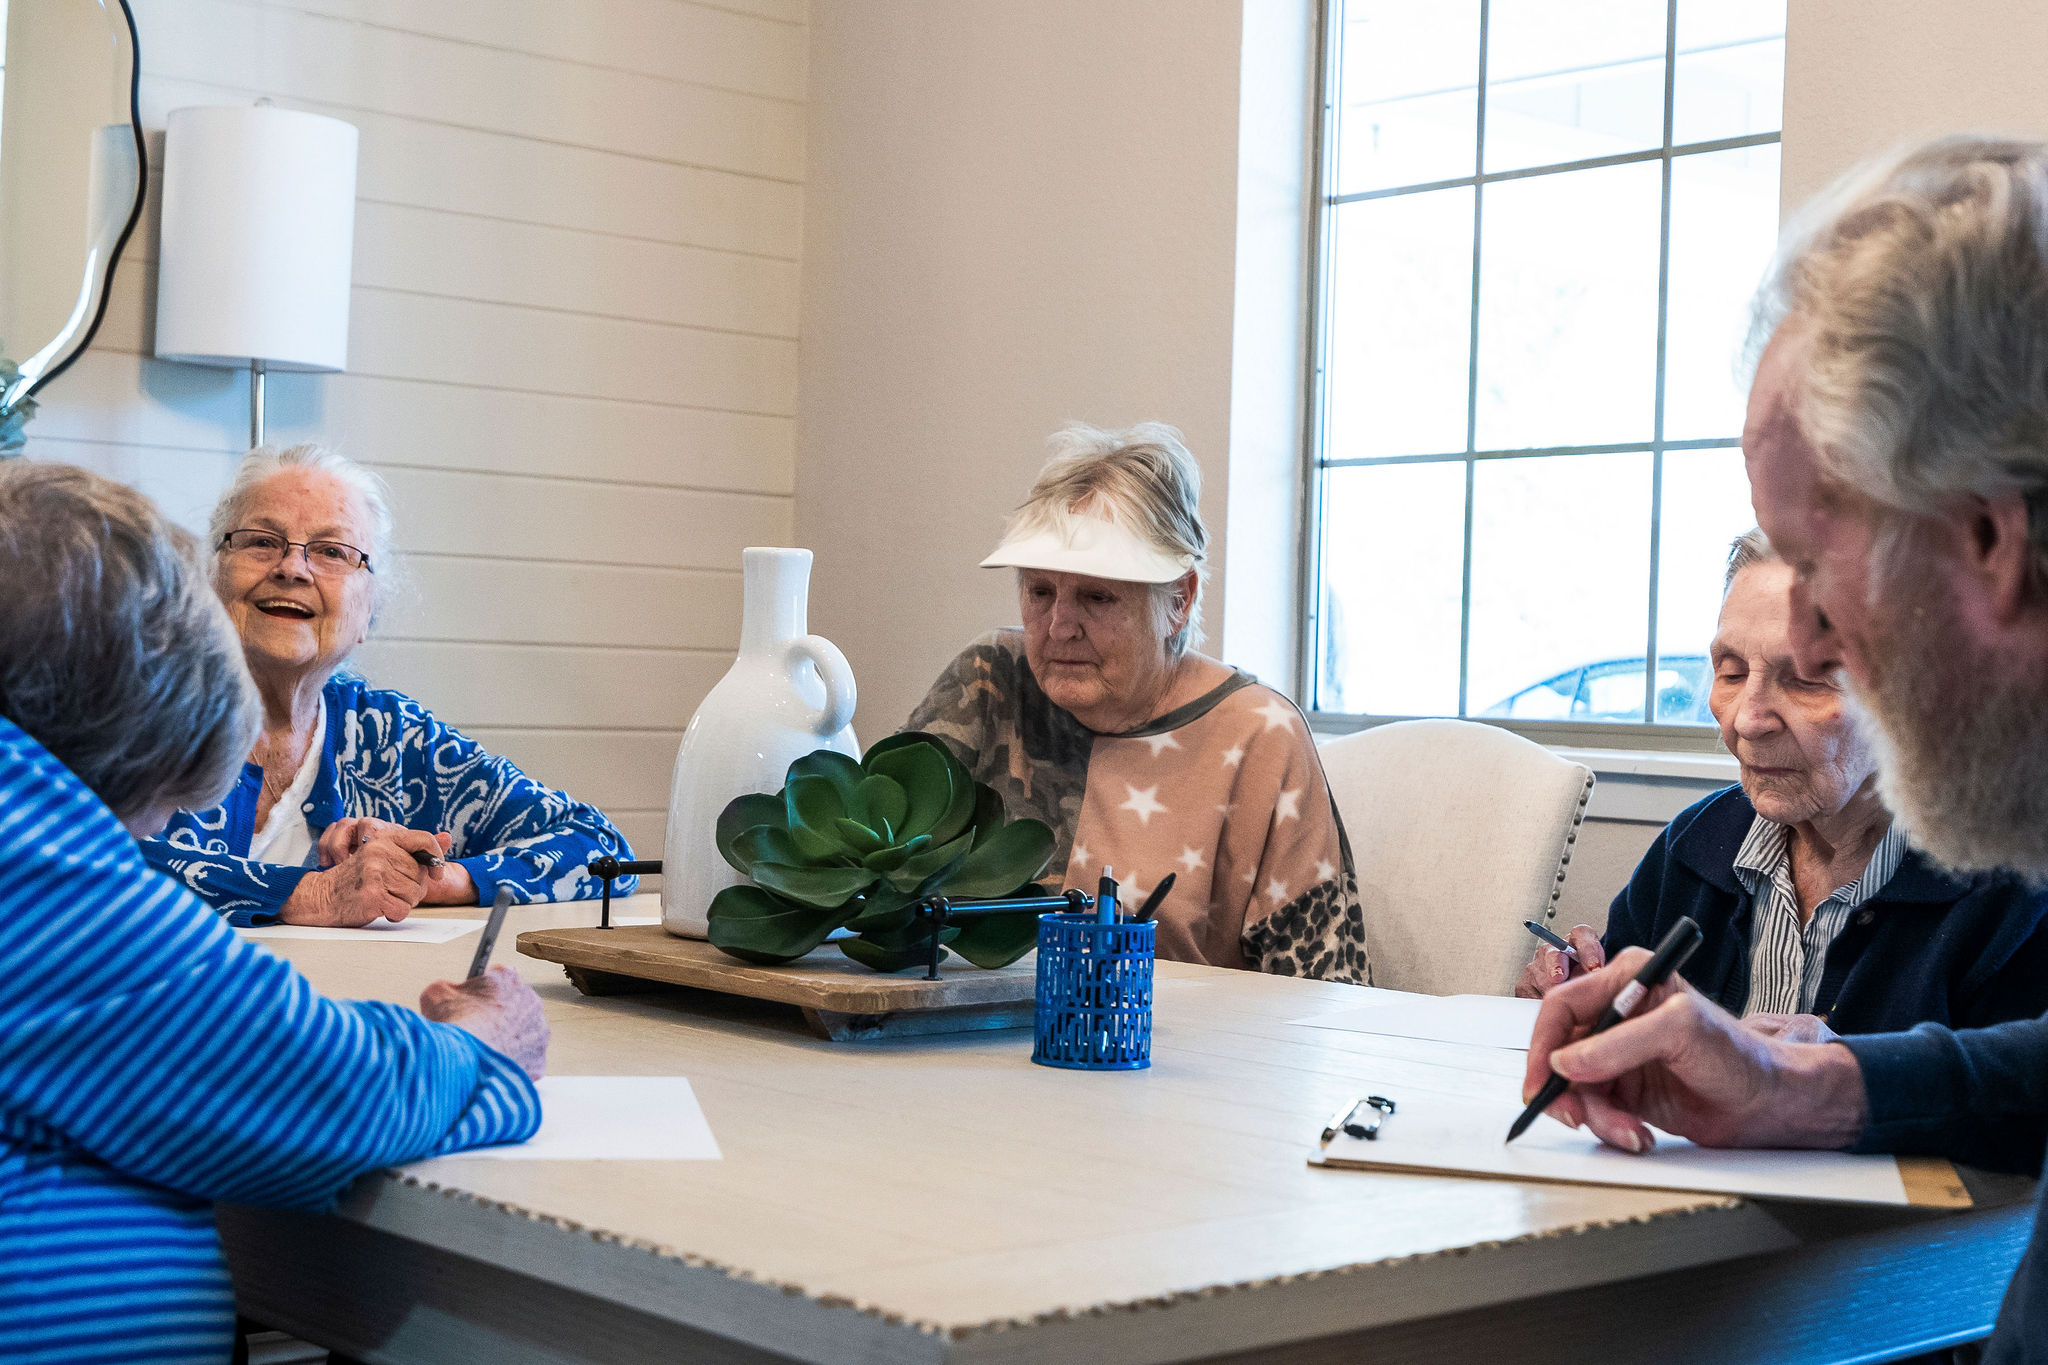 Residents of Sundale Senior Living in Huntsville, TX, playing a game together